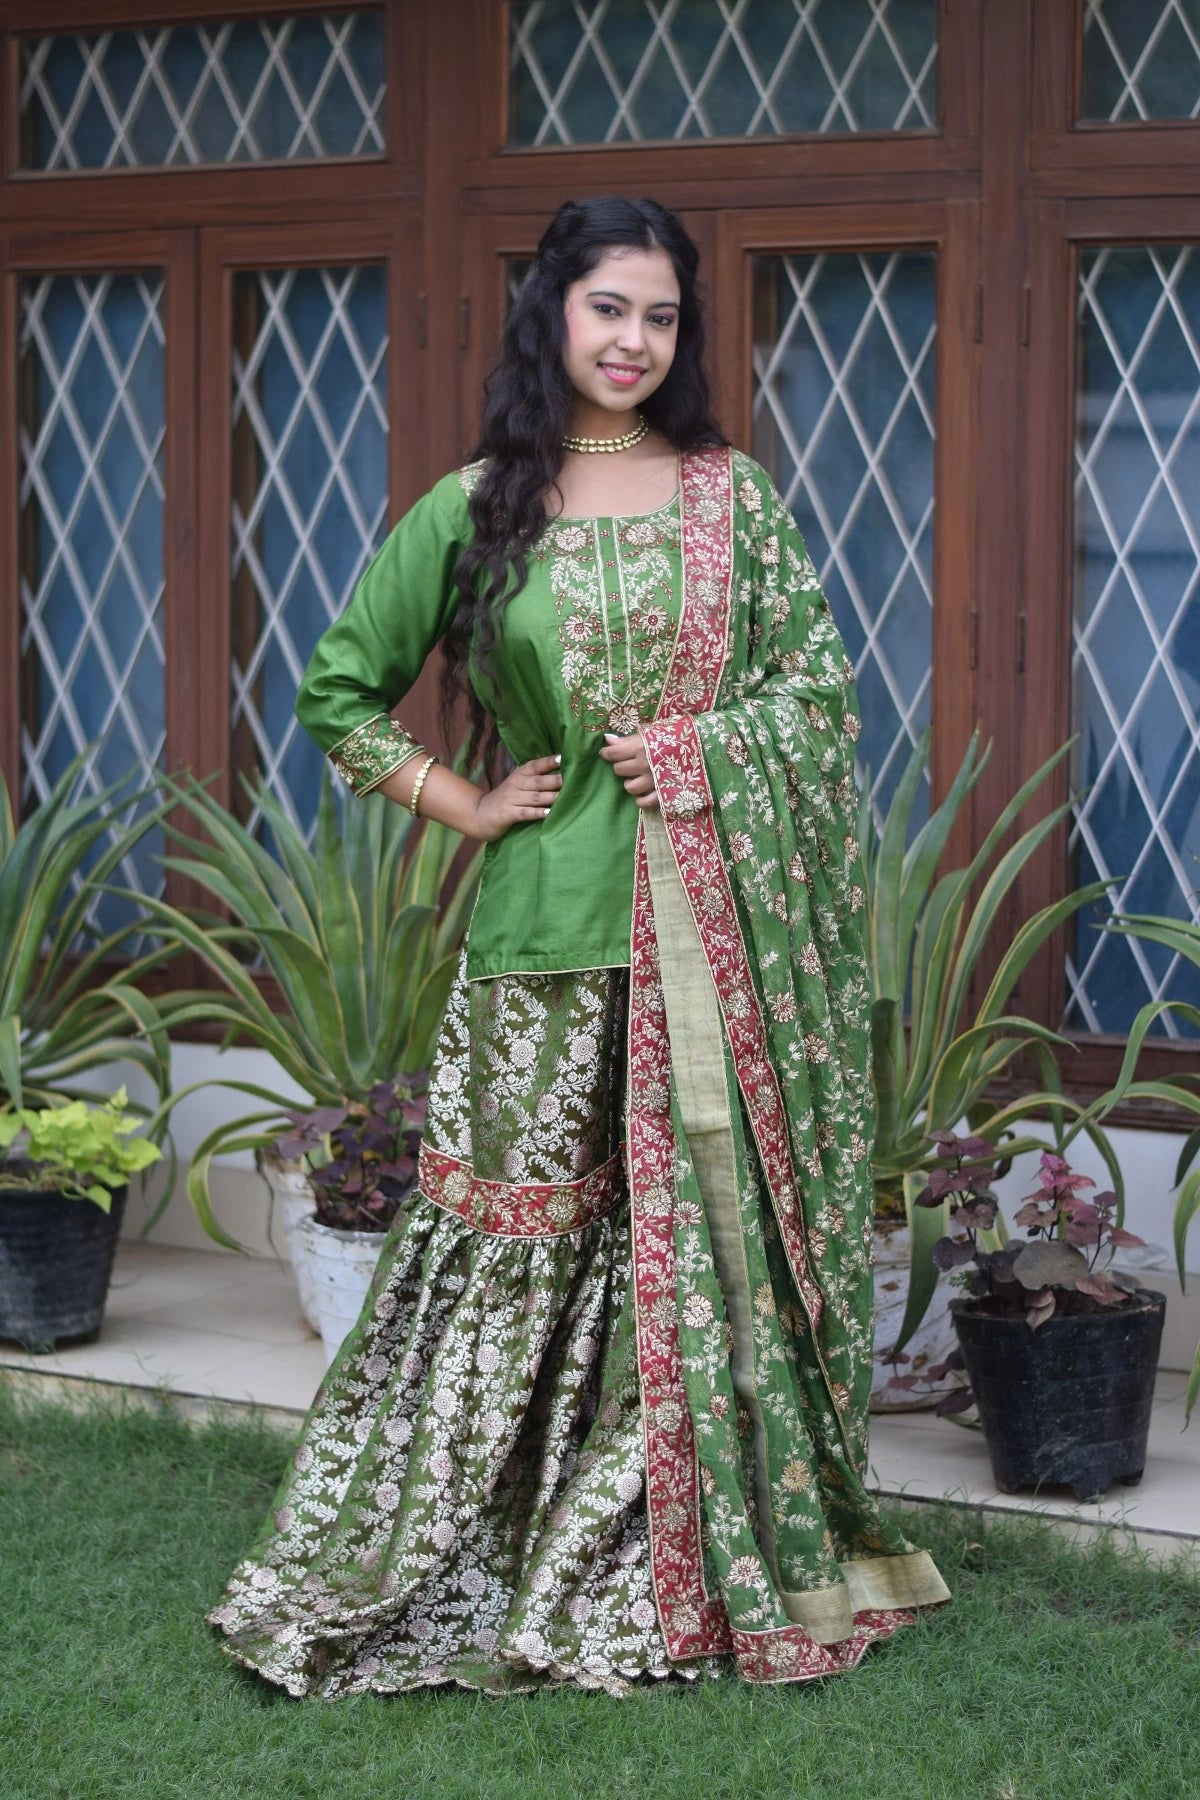 A woman wearing an exquisite green kamkhab zardozi embroidered wedding gharara suit.